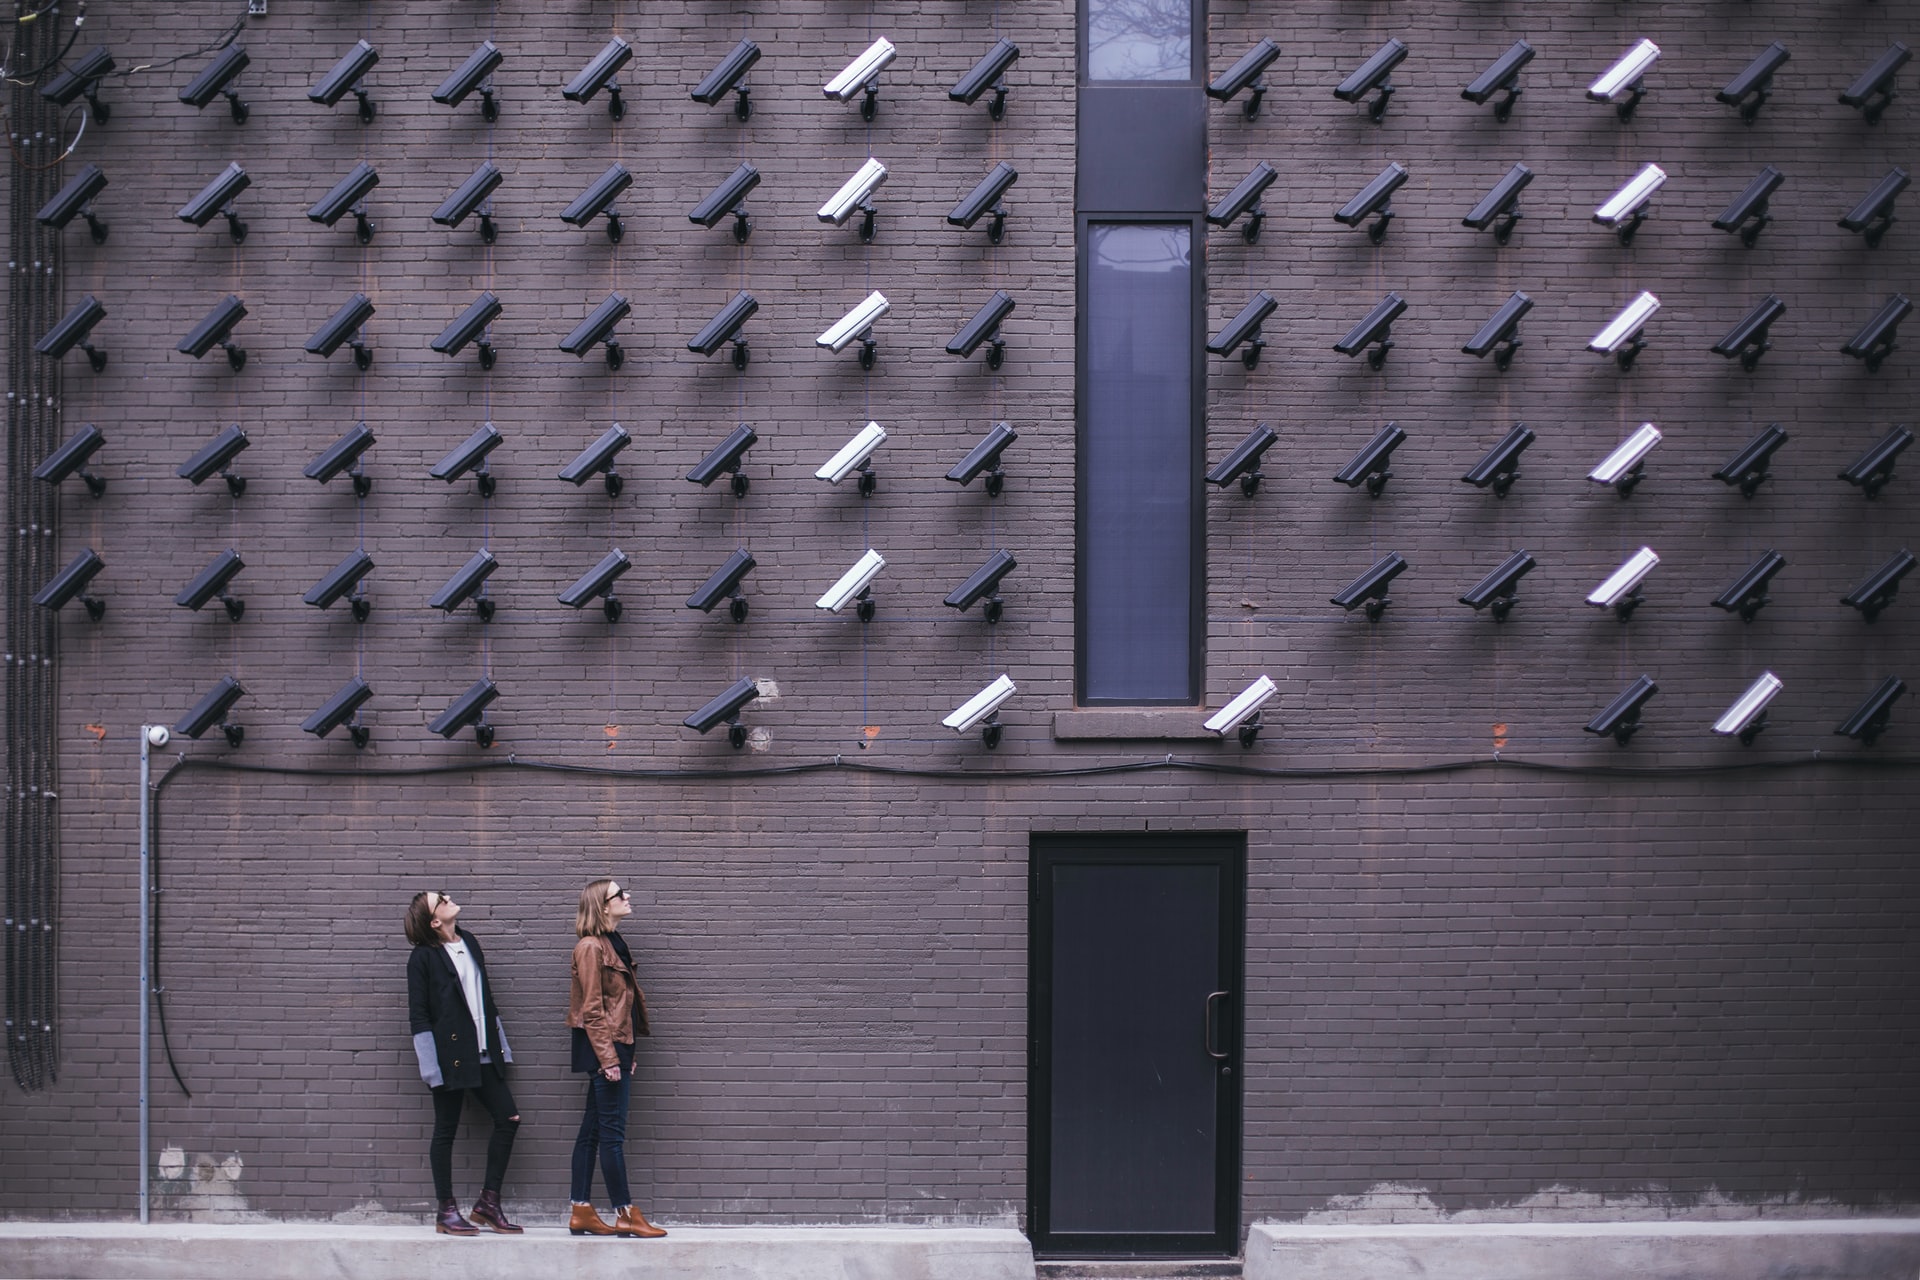 A large number of surveillence cameras on a wall. All are pointing in the same direction and are looking at two people.